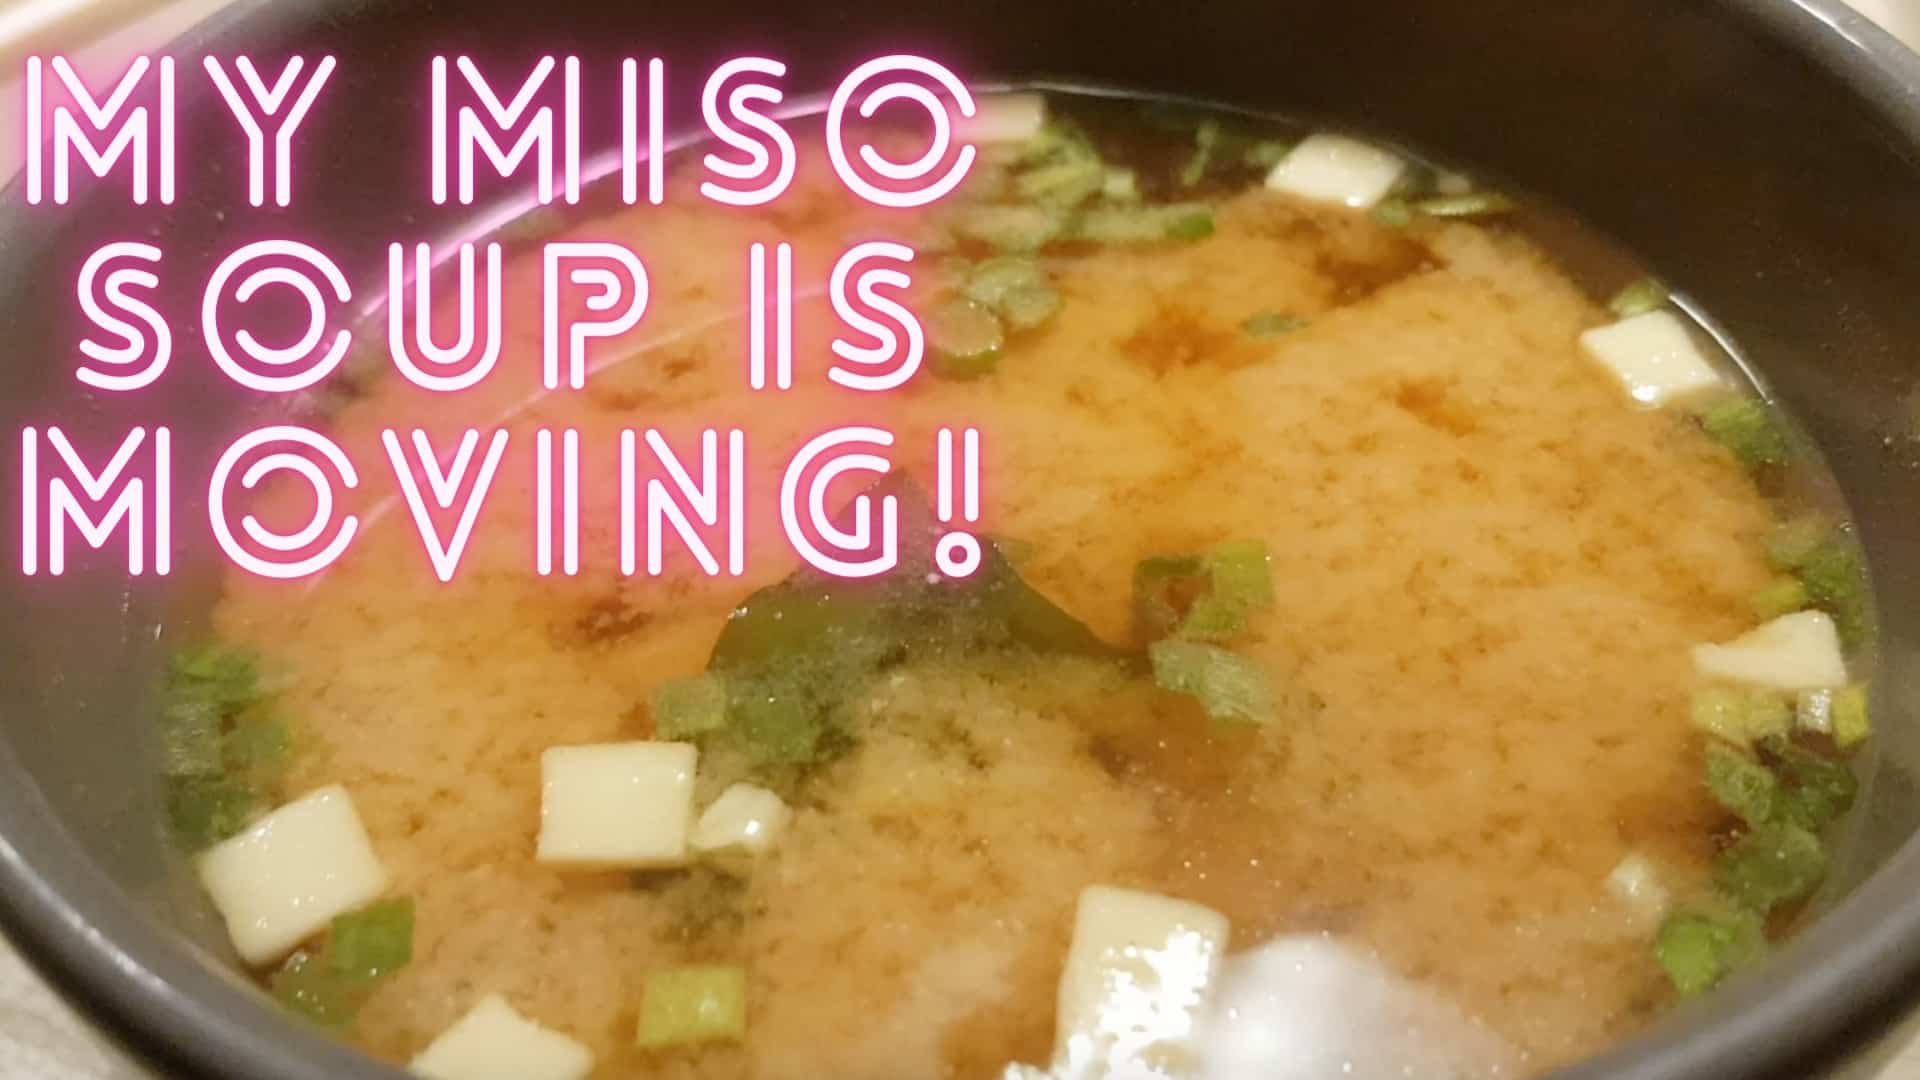 My miso soup is moving